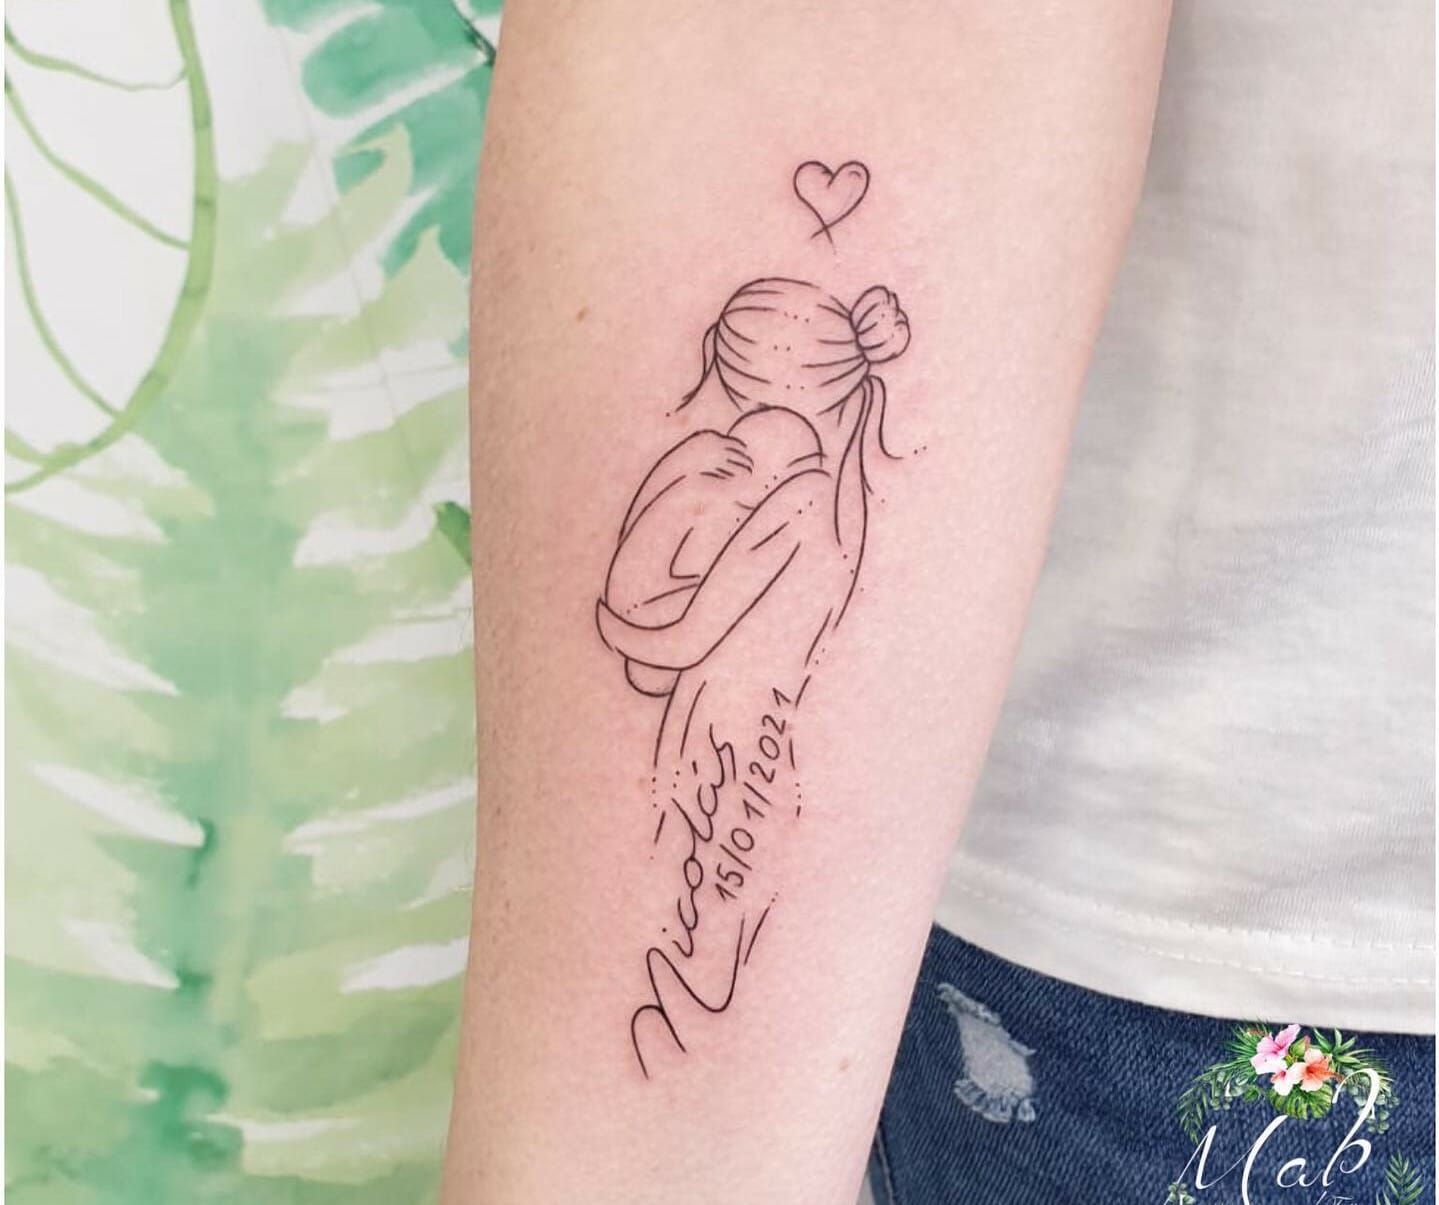 12+ Mother Tattoo Ideas To Inspire You! - alexie